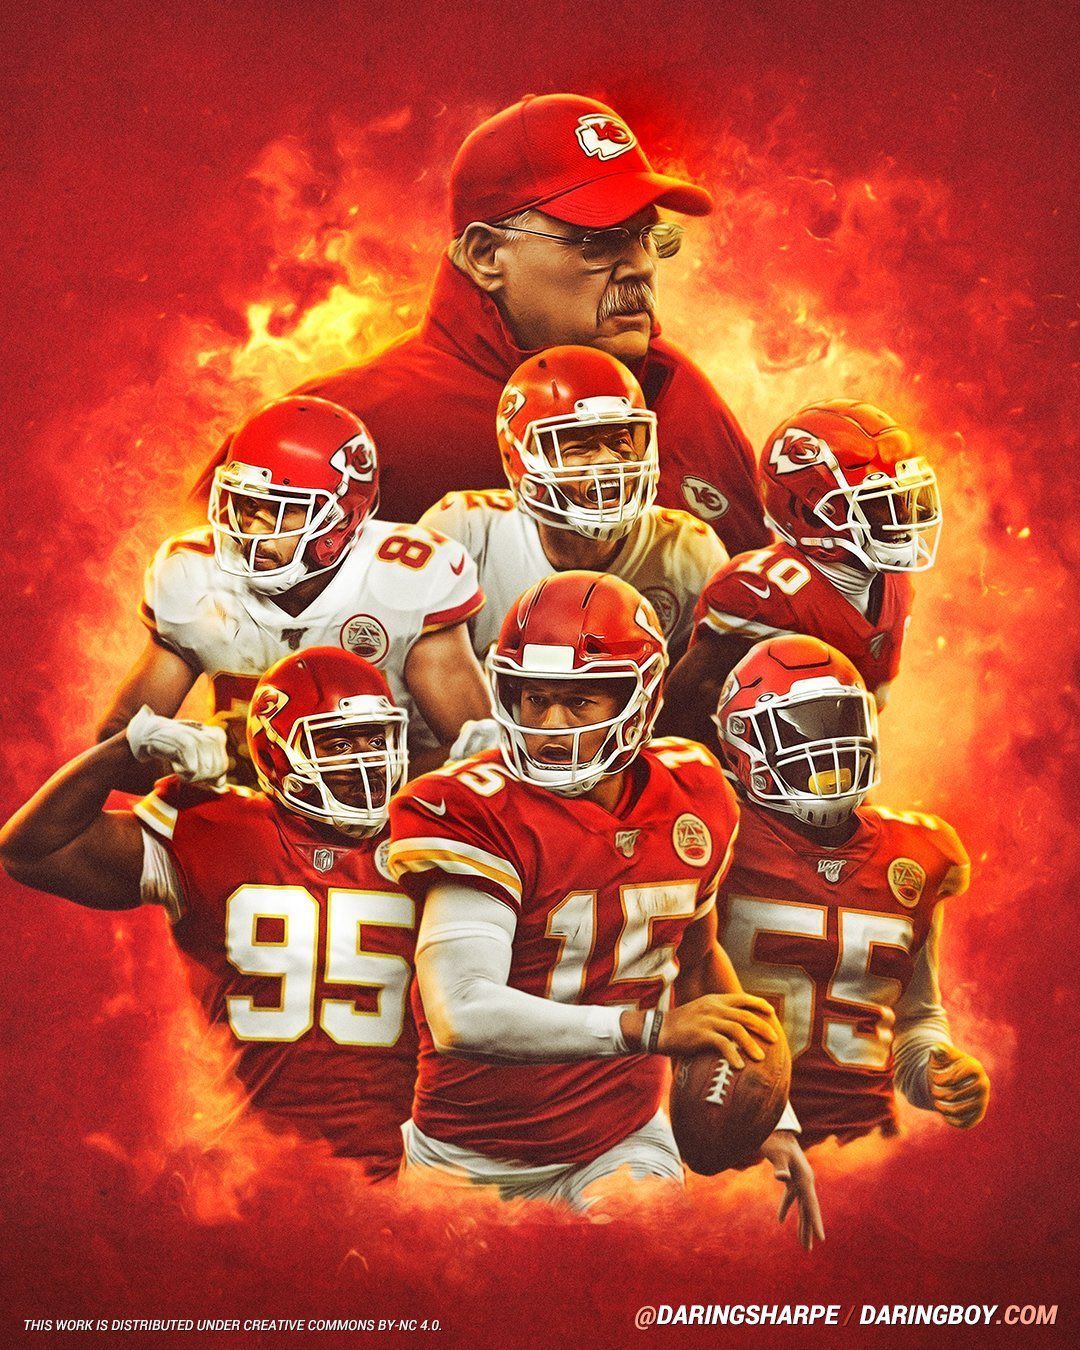 Trenches on Twitter. Kansas city chiefs logo, Kansas city chiefs craft, Kansas city chiefs football